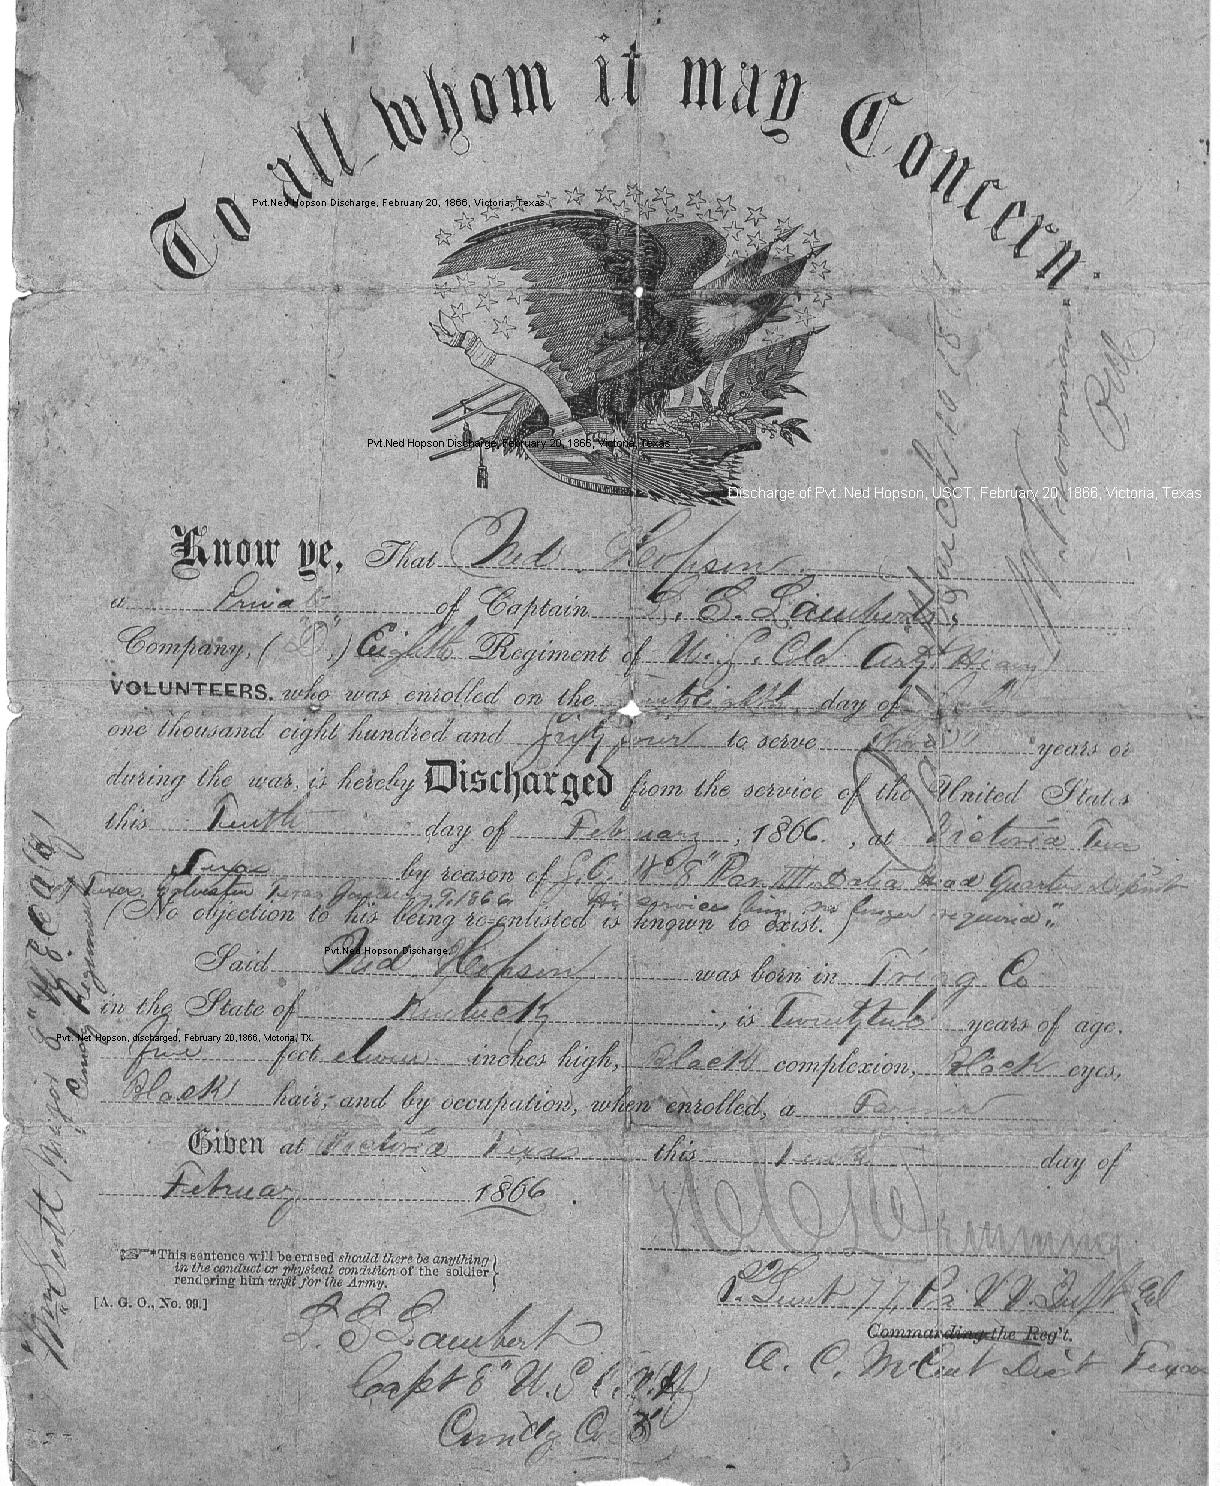 Pvt. Ned Hopson, USCT discharge